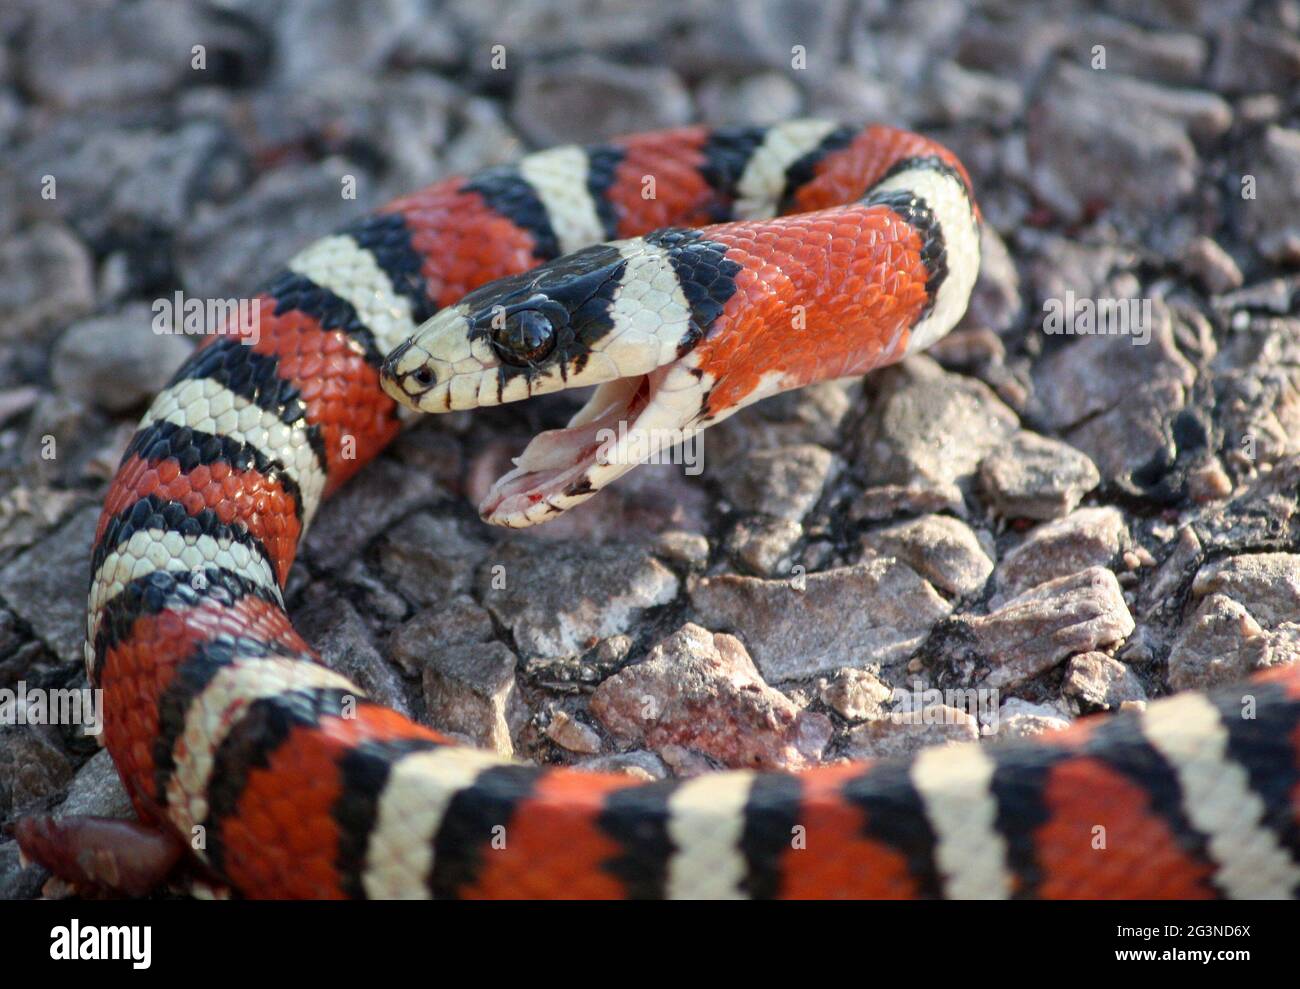 Closeup of king snake with gaping open mouth on gravel road Stock Photo